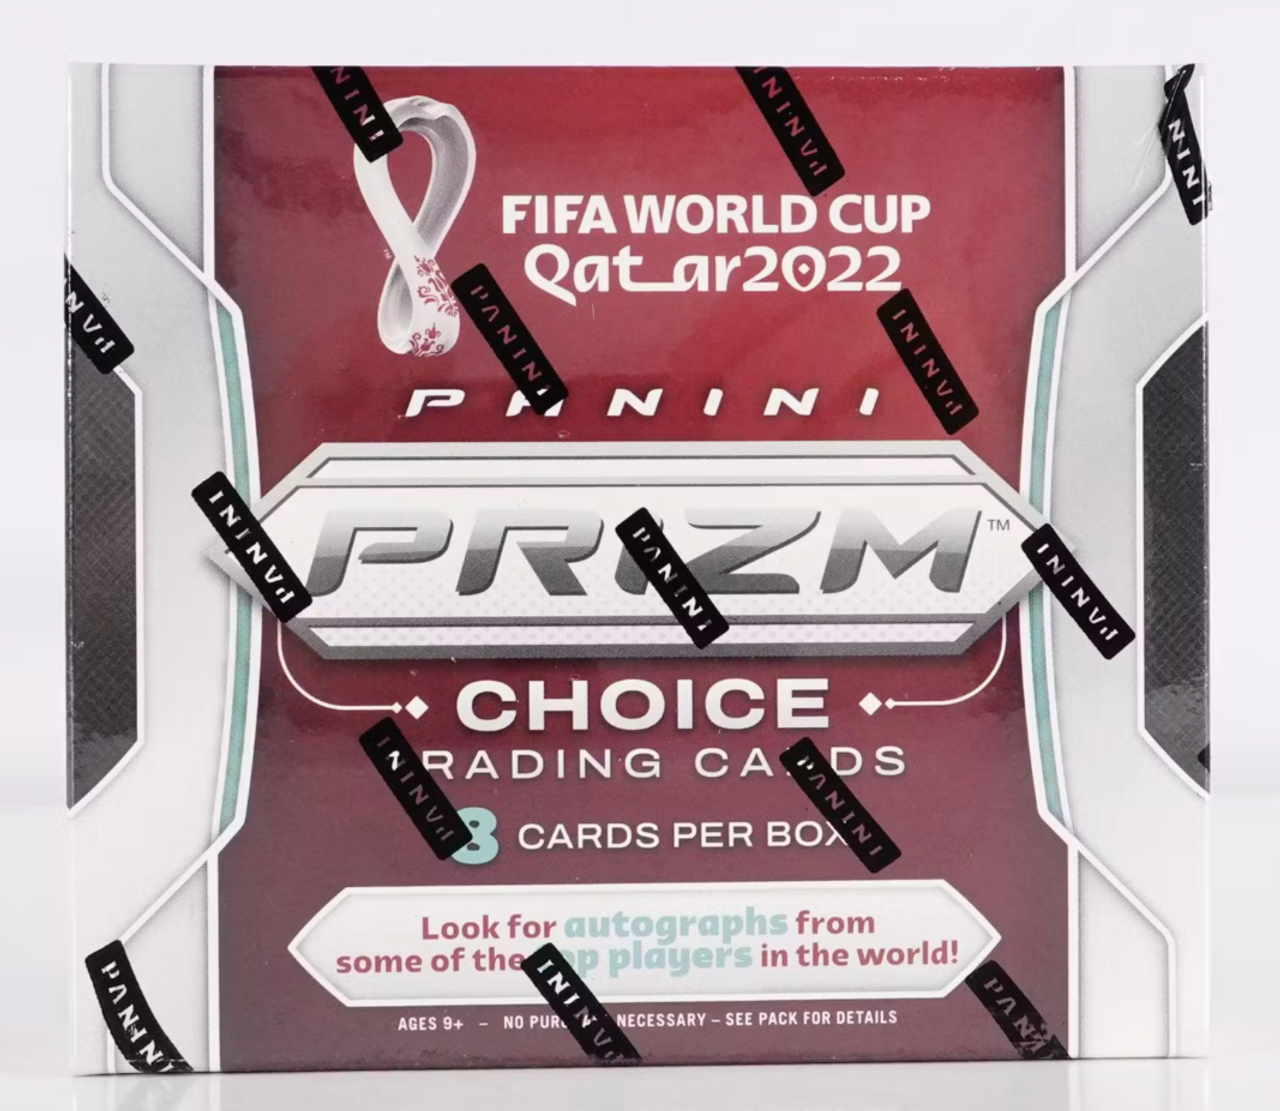 THESE BOXES ARE INSANE! 🤯 2022 PANINI PRIZM SOCCER WORLD CUP